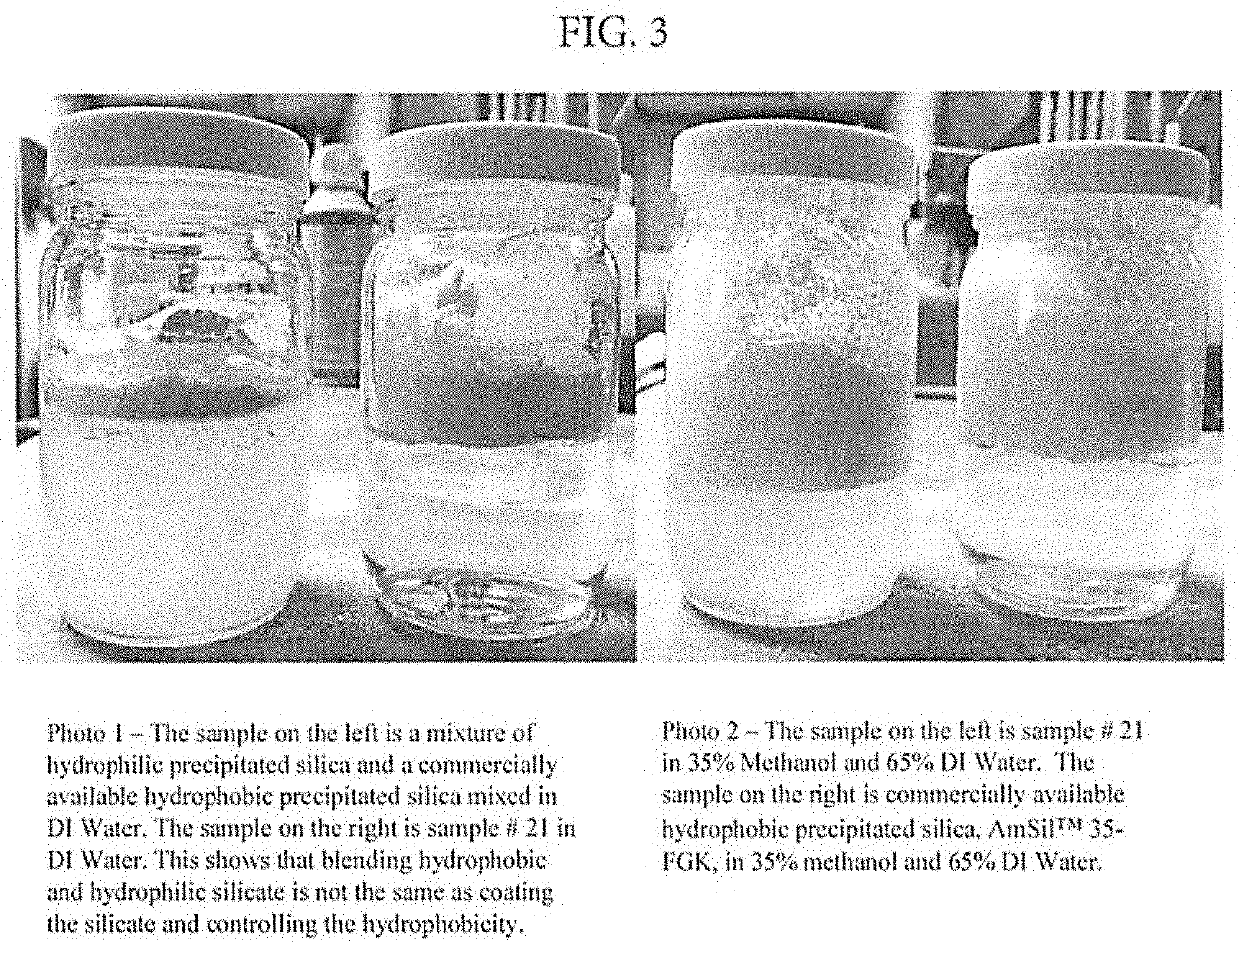 Demulsification compound and method for oil separation from waste streams